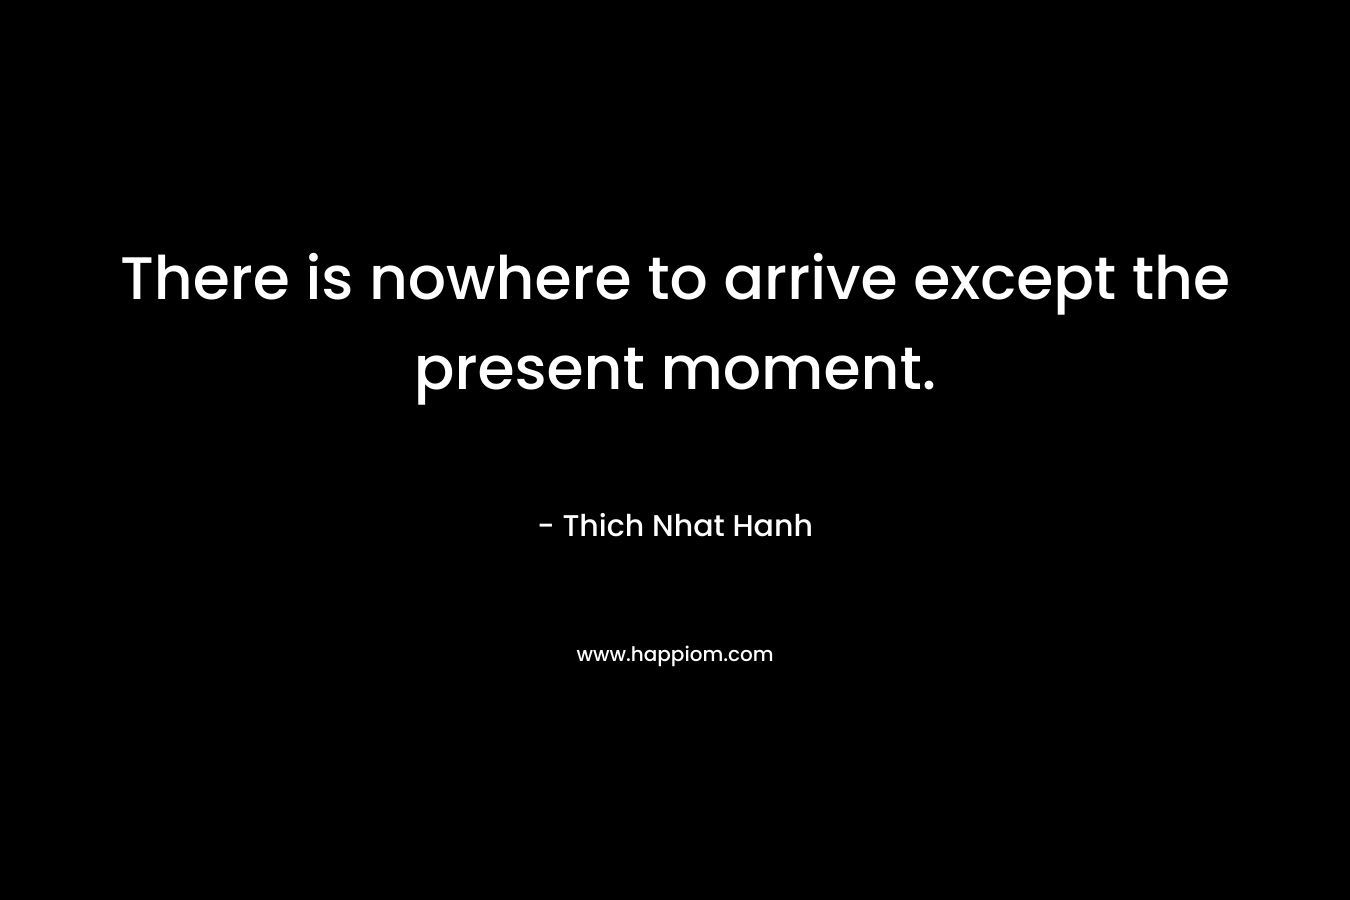 There is nowhere to arrive except the present moment. – Thich Nhat Hanh